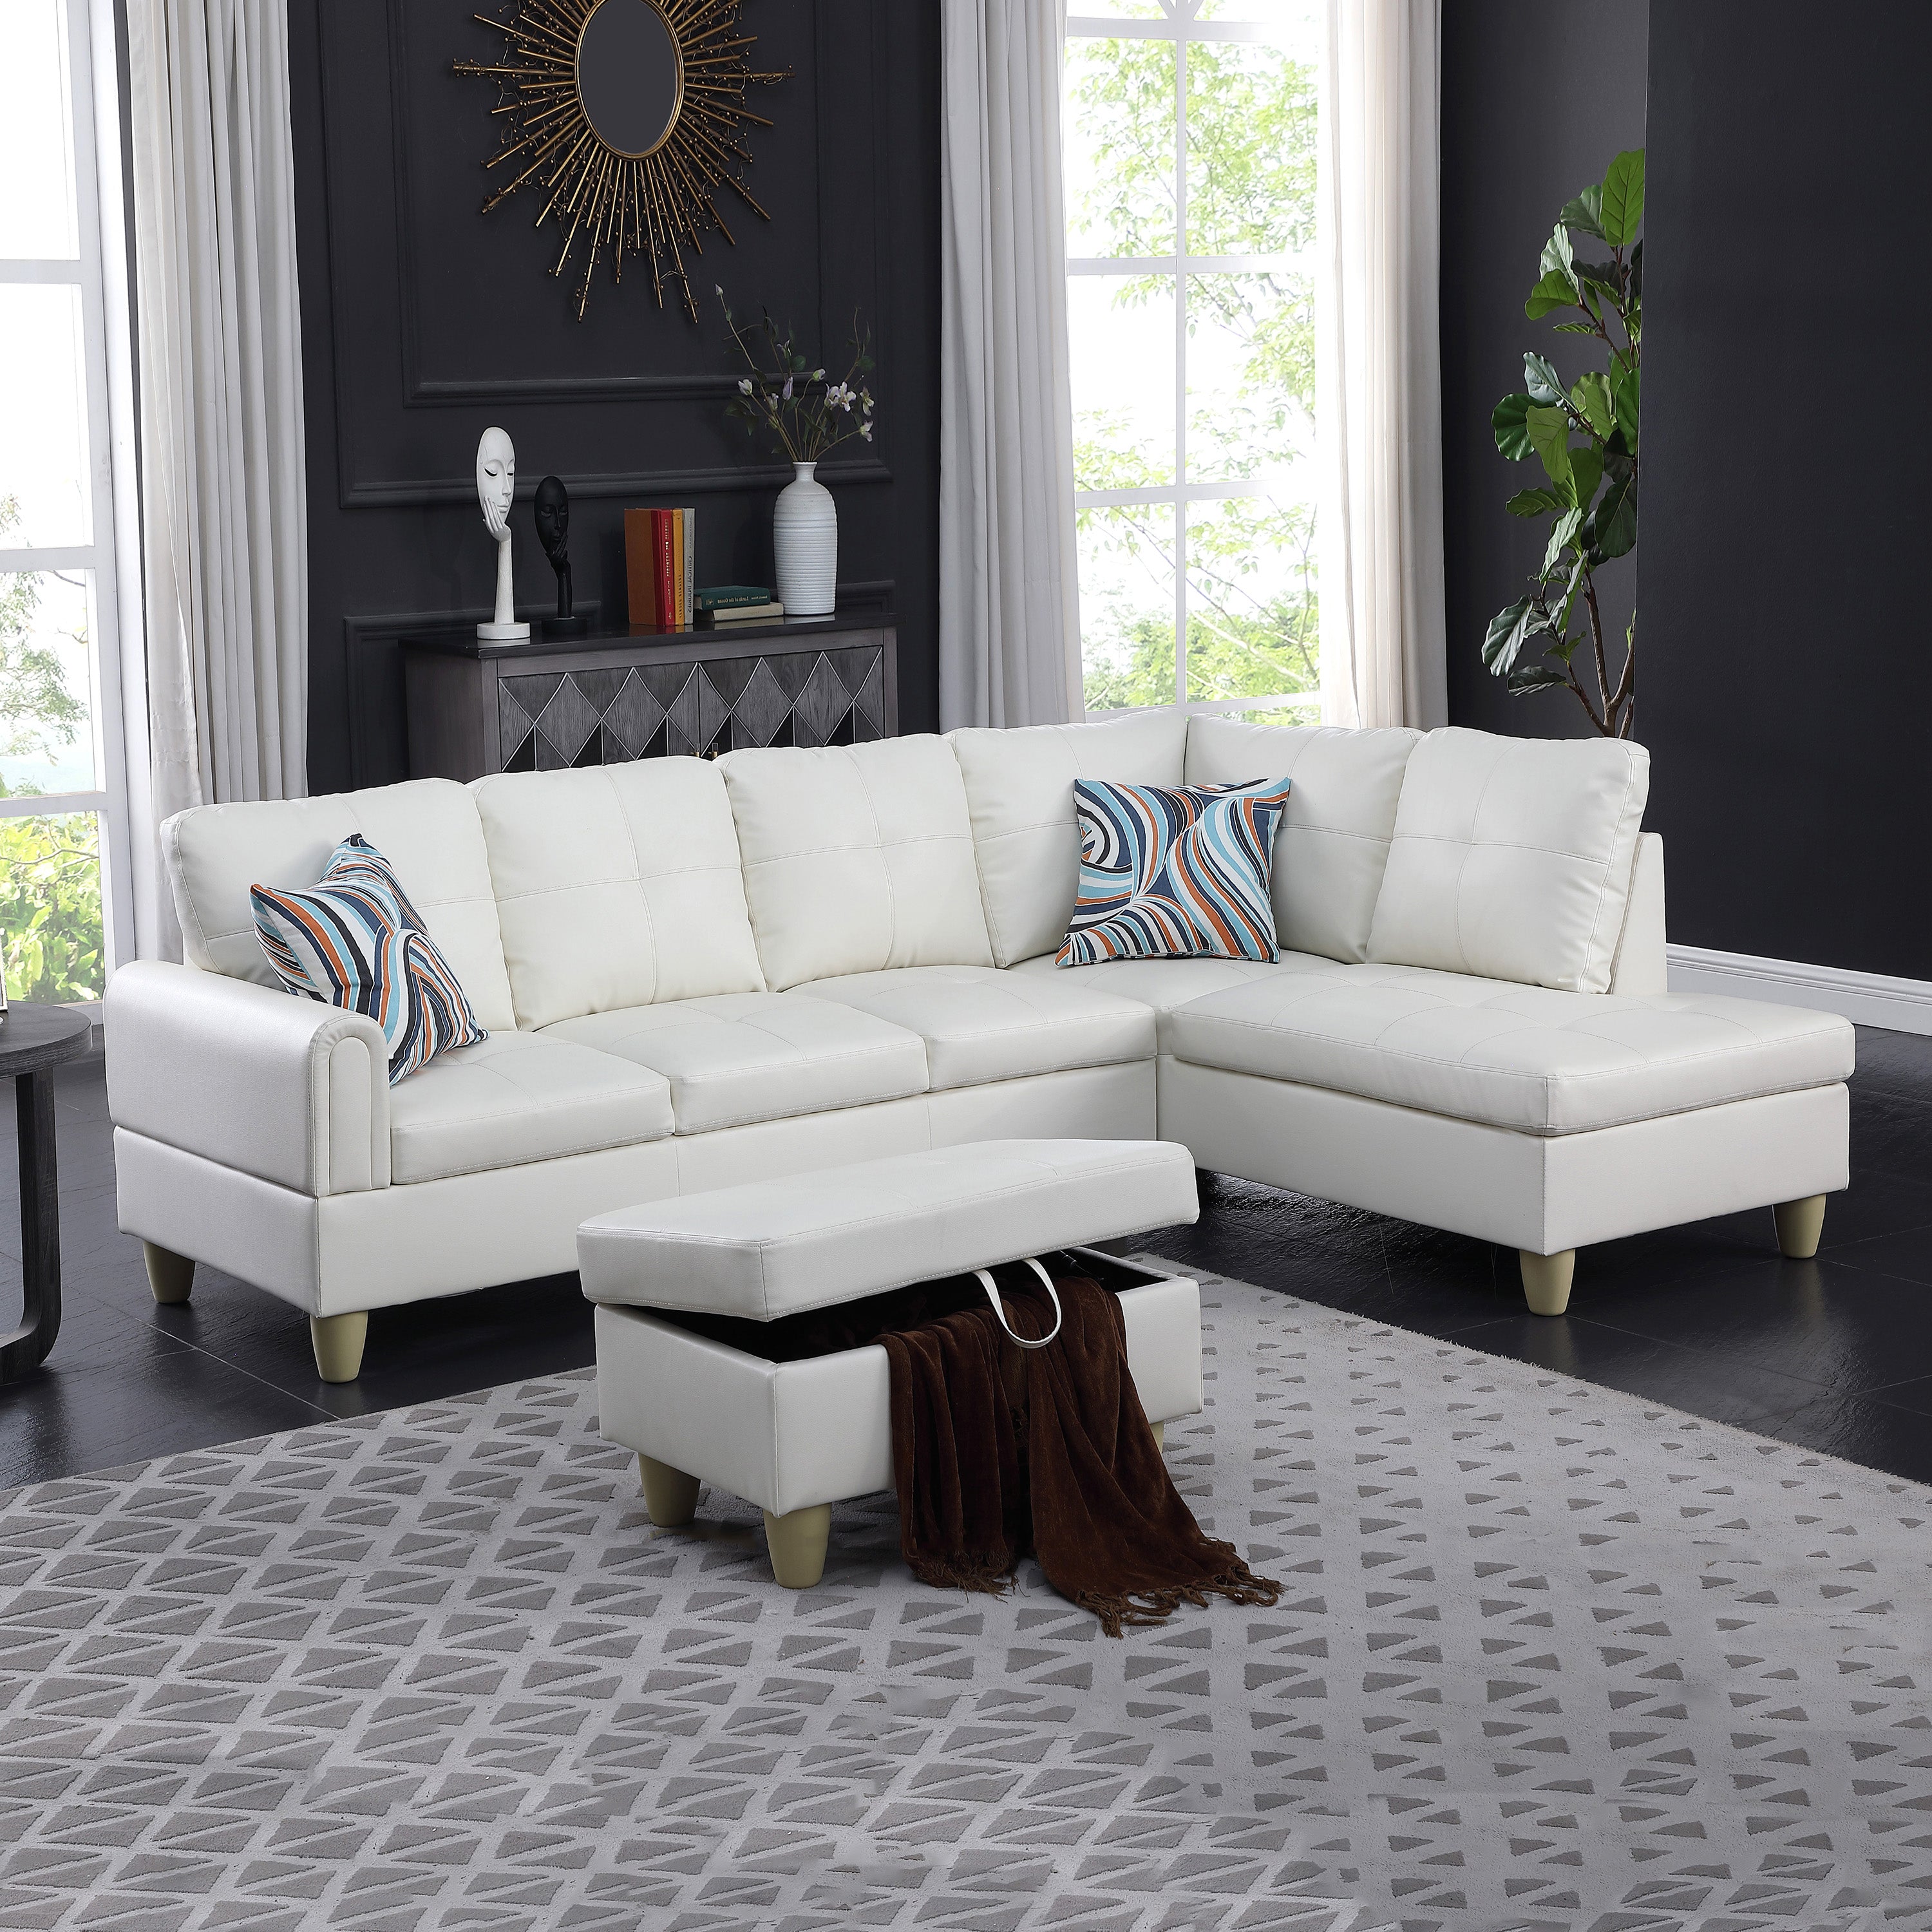 Ainehome White Faux Leather Living Room Sofa Set